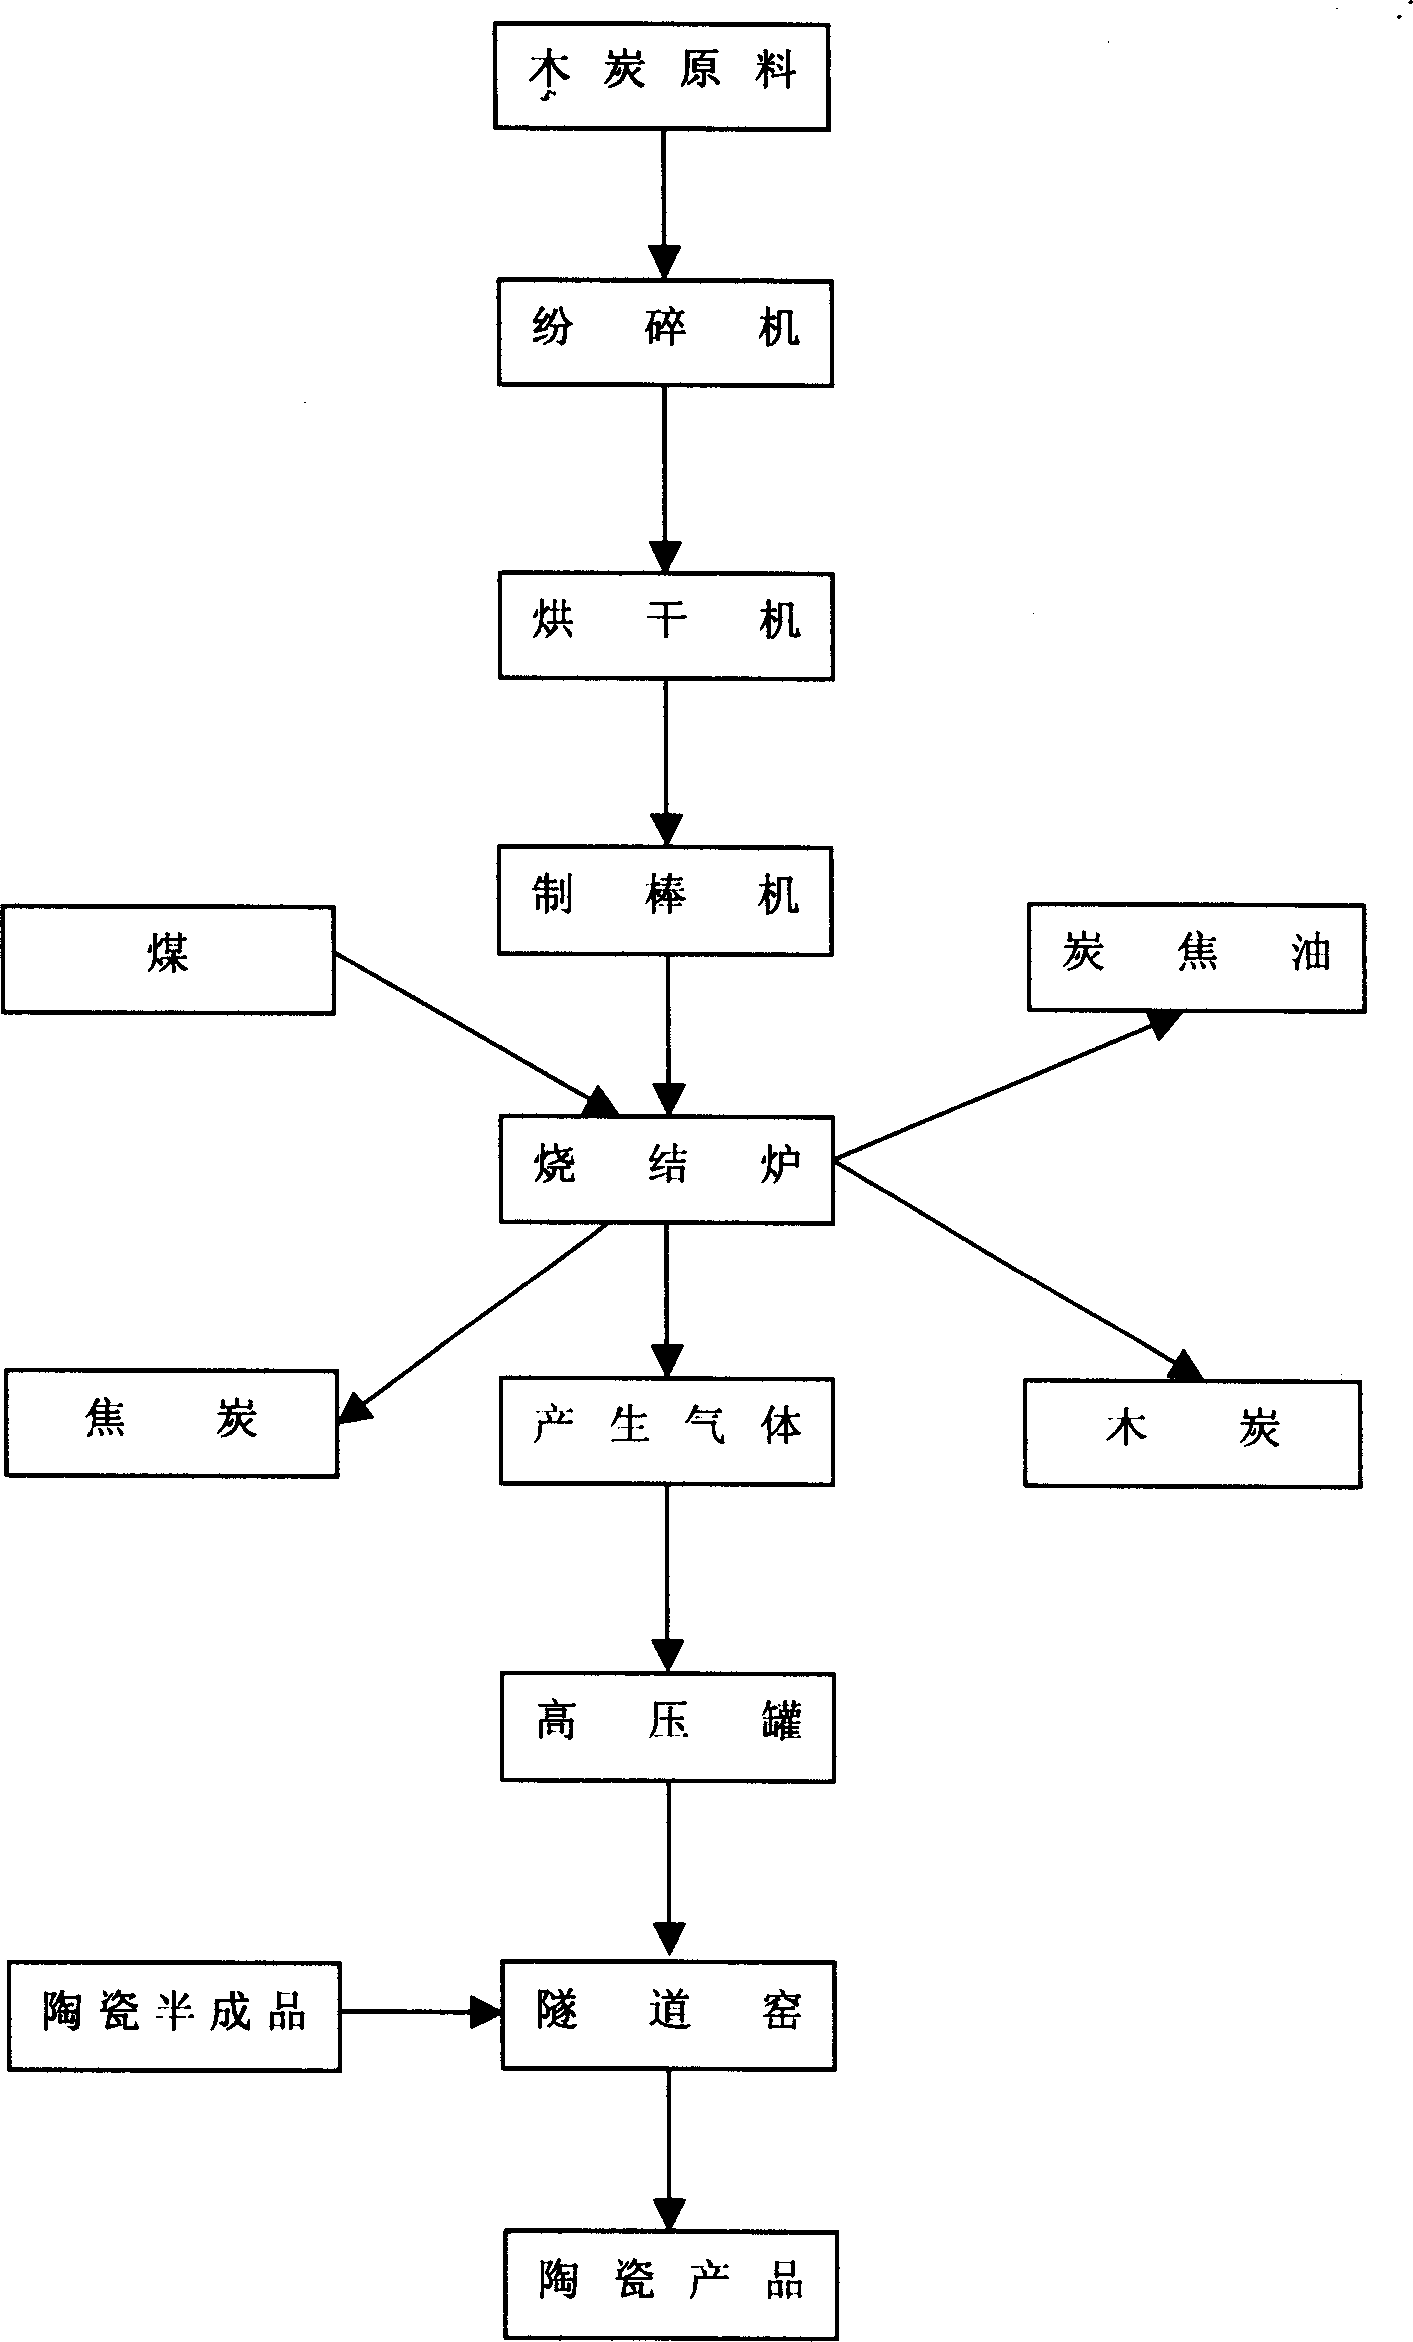 Process flow for producing charcoal, coke, coal gas, and ceramic products using hazel rod coal resurgent gases technique